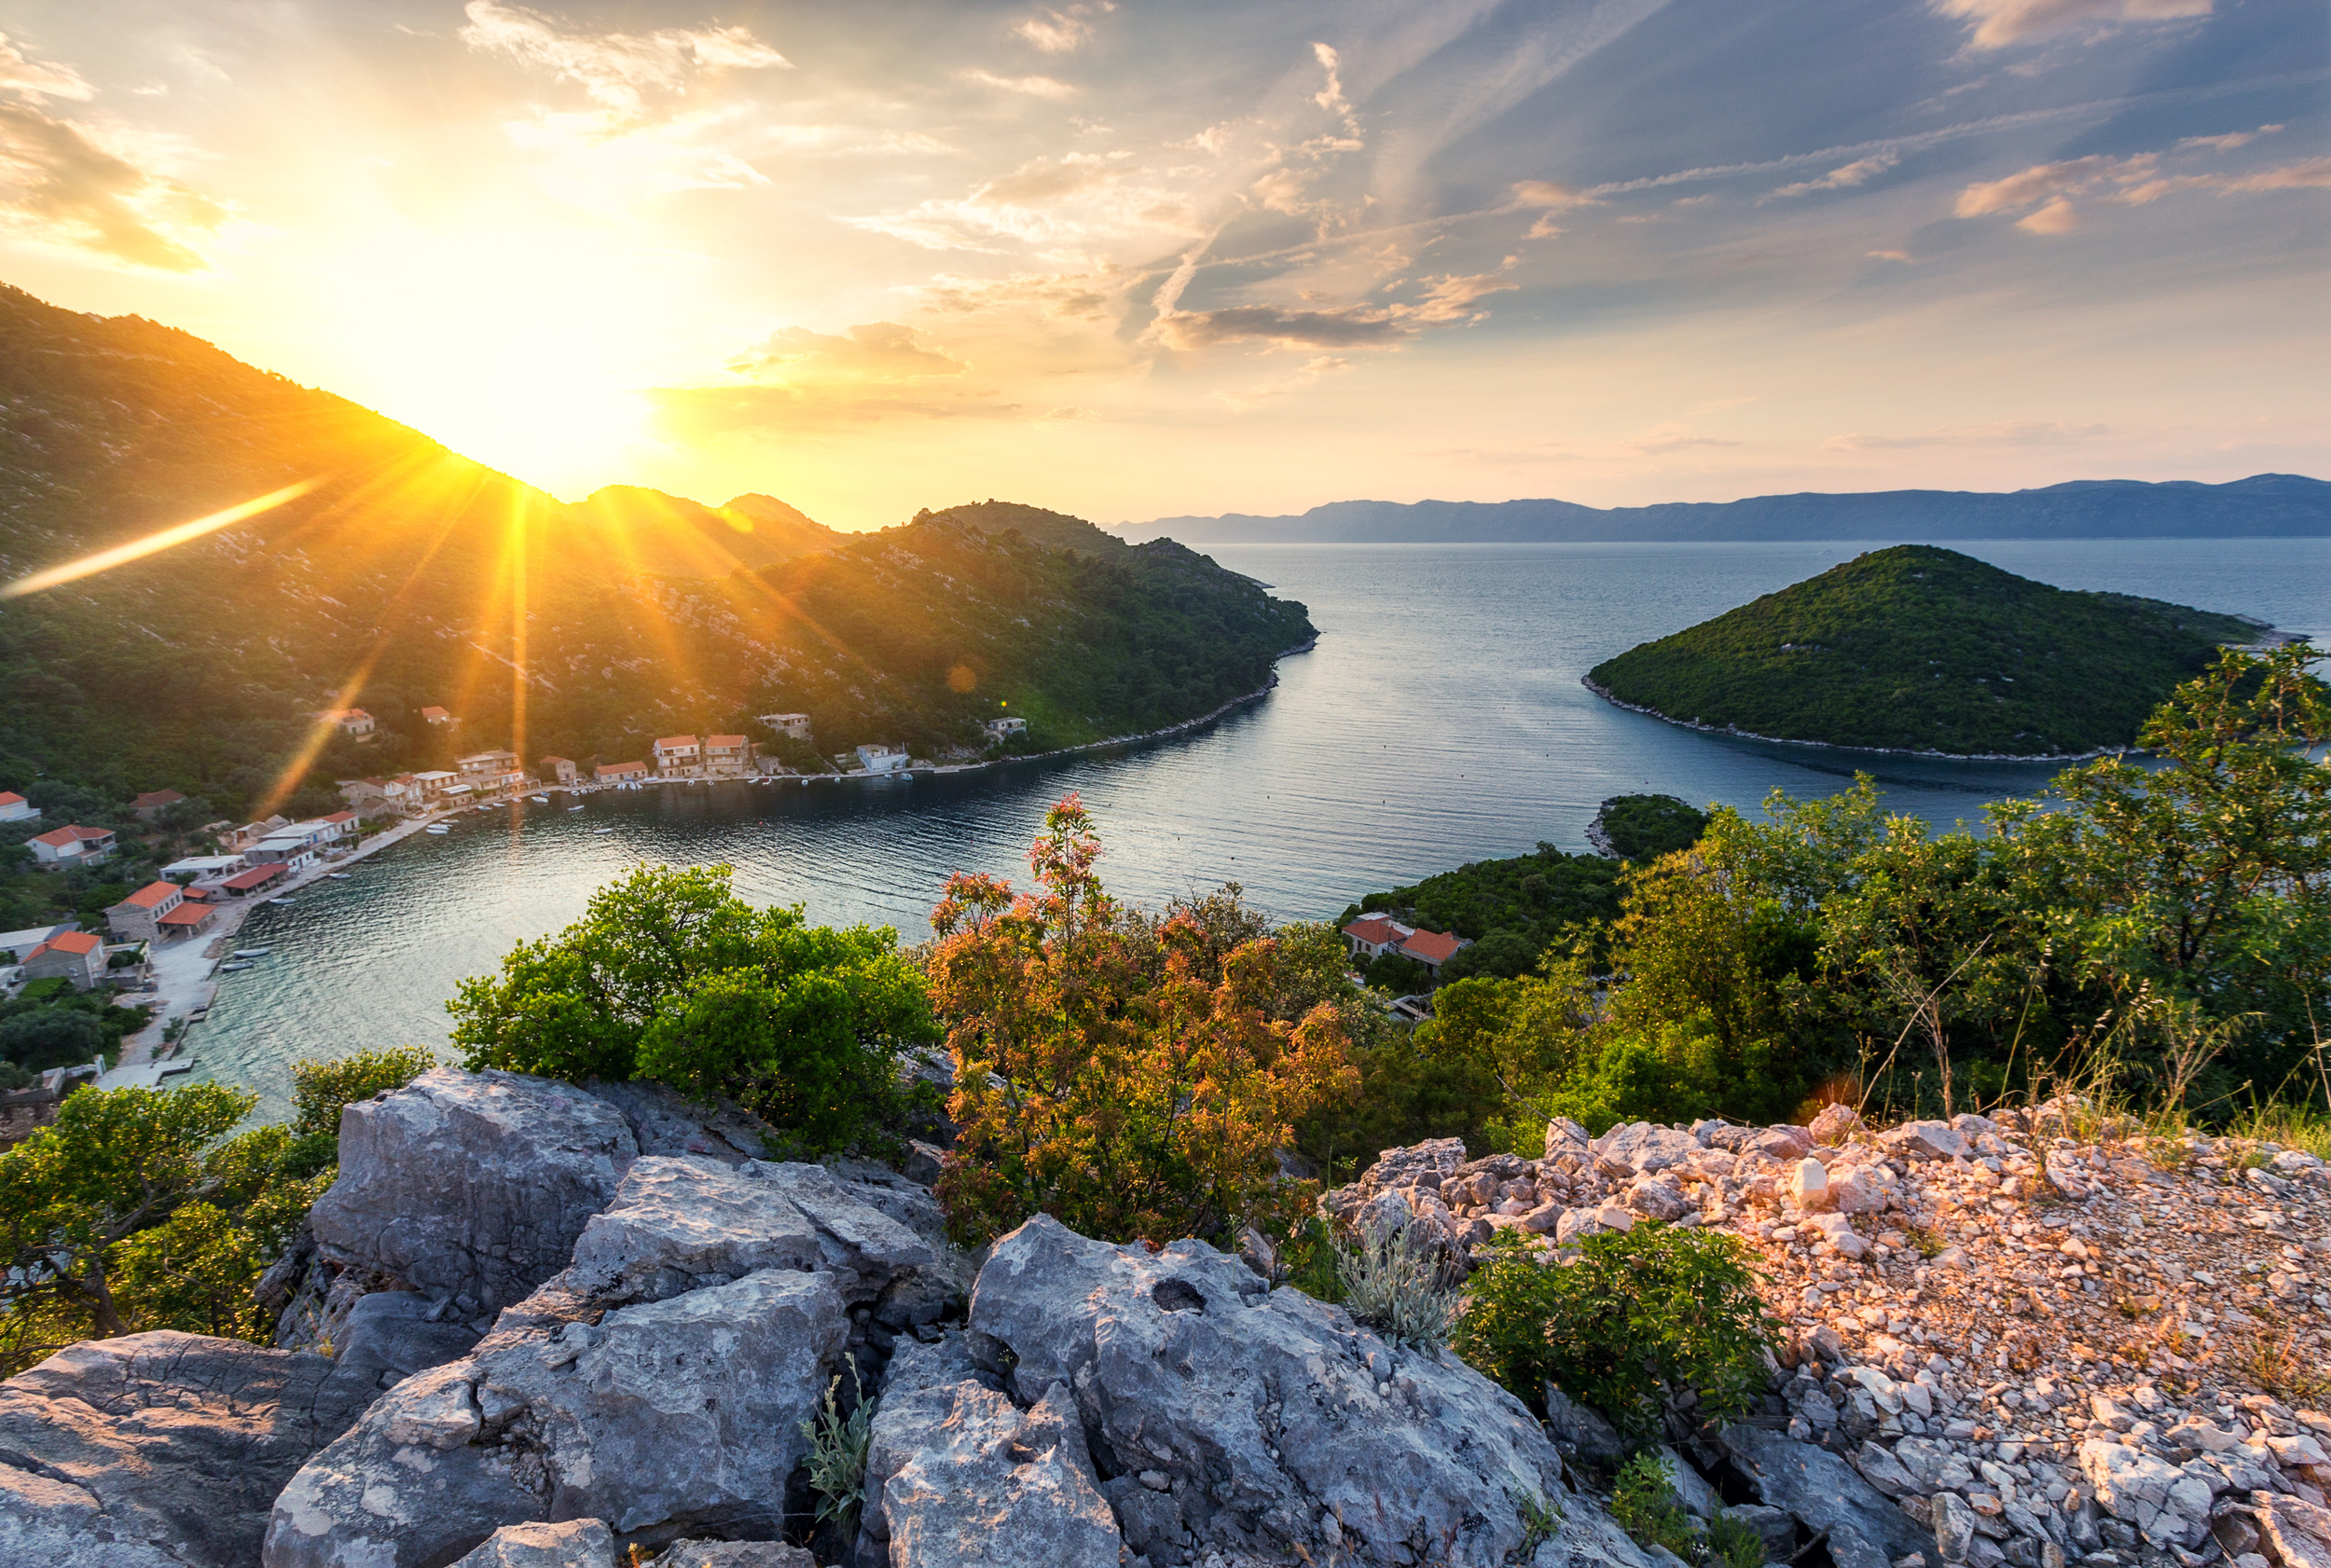 <p>The greenest island in the country, Mljet is a nature-lovers paradise. It’s also home to amazing wine, cheese, and beautiful beaches. And don’t miss Veliko and Malo Jezero, the two salted lakes on the island!</p><p><a href='https://www.msn.com/en-us/community/channel/vid-cj9pqbr0vn9in2b6ddcd8sfgpfq6x6utp44fssrv6mc2gtybw0us'>Follow us on MSN to see more of our exclusive lifestyle content.</a></p>